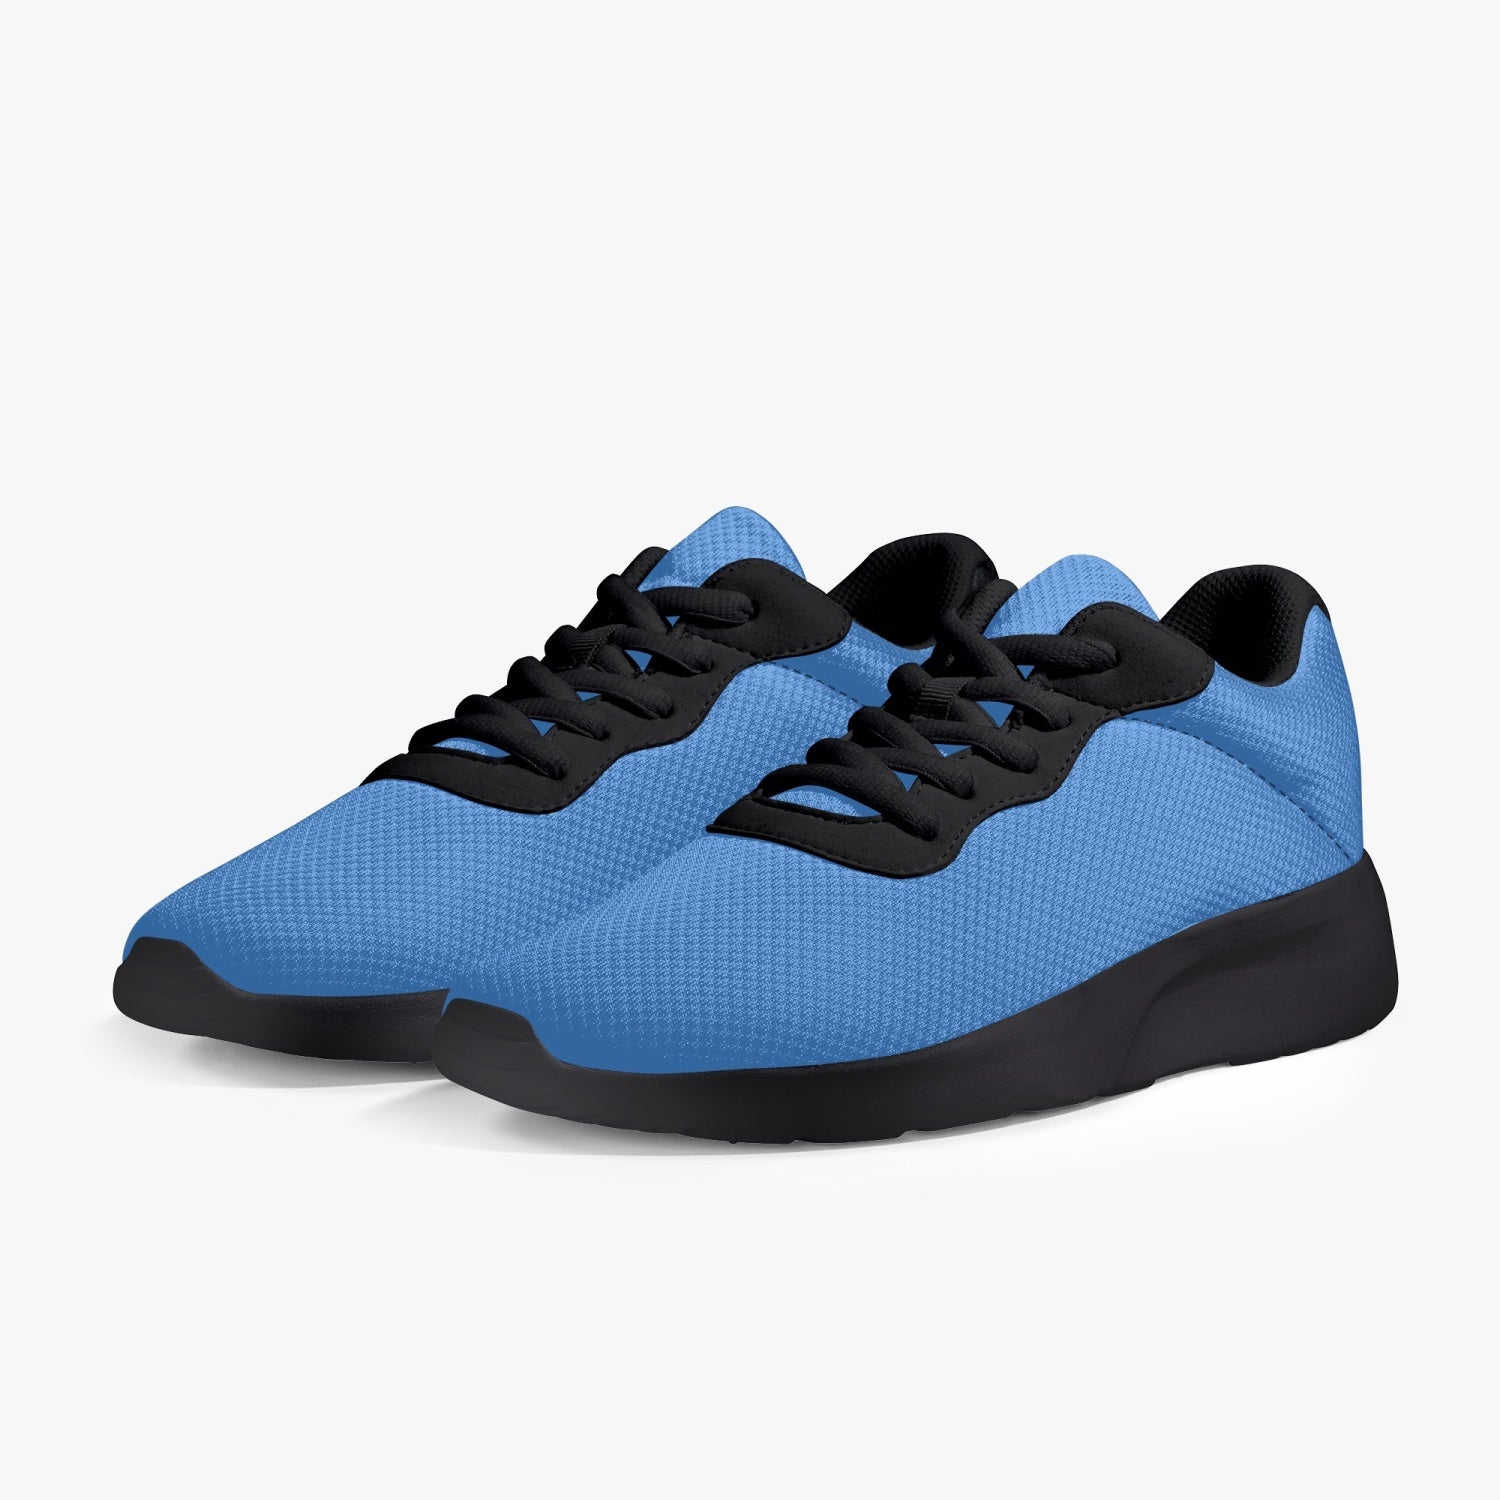 Sky Blue Unisex Running Shoes, Best Blue Breathable Minimalist Solid Color Soft Lifestyle Unisex Casual Designer Mesh Running Shoes With Lightweight EVA and Supportive Comfortable Black Soles (US Size: 5-11) Mesh Athletic Shoes, Mens Mesh Shoes, Mesh Shoes Women Men, Men's and Women's Classic Low Top Mesh Sneaker, Men's or Women's Best Breathable Mesh Shoes, Mesh Sneakers Casual Shoes 